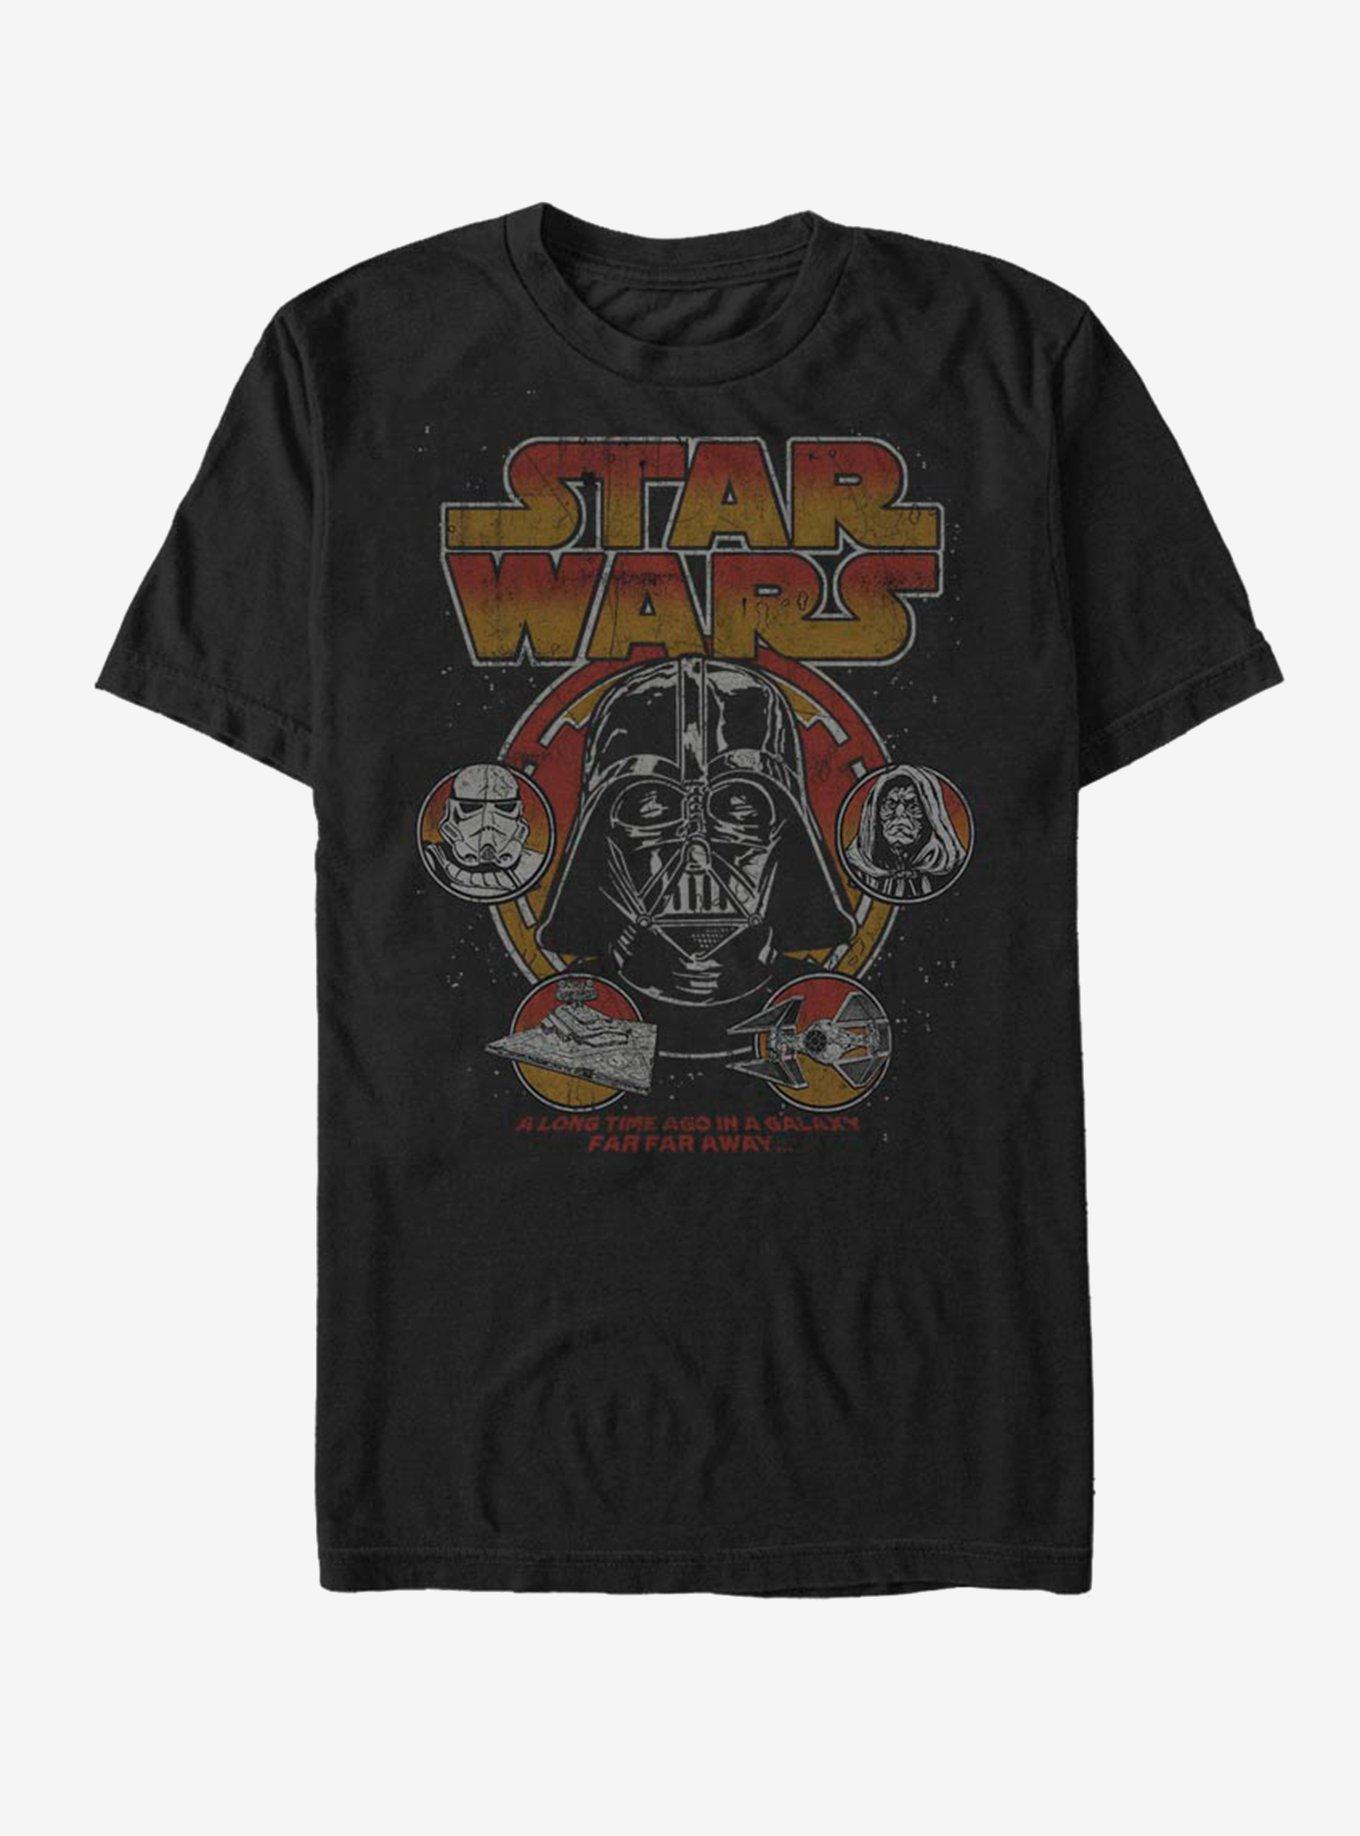 Star Wars Fave Old Tee T-Shirt